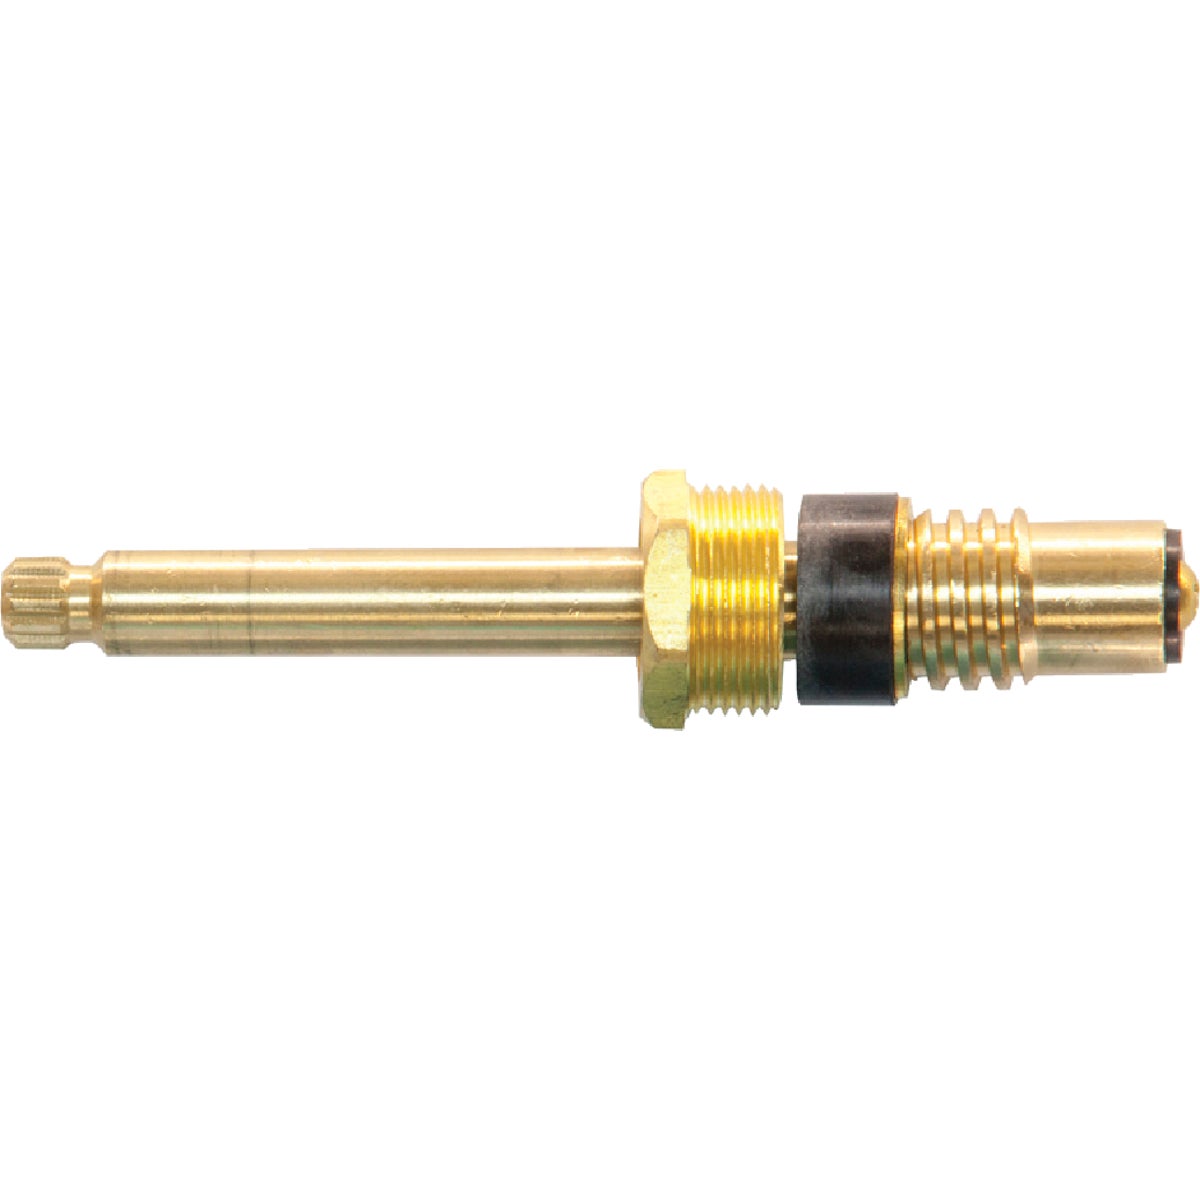 Item 404466, Install this Danco 10I-1H Hot stem for Crane to fix your leaky faucet.